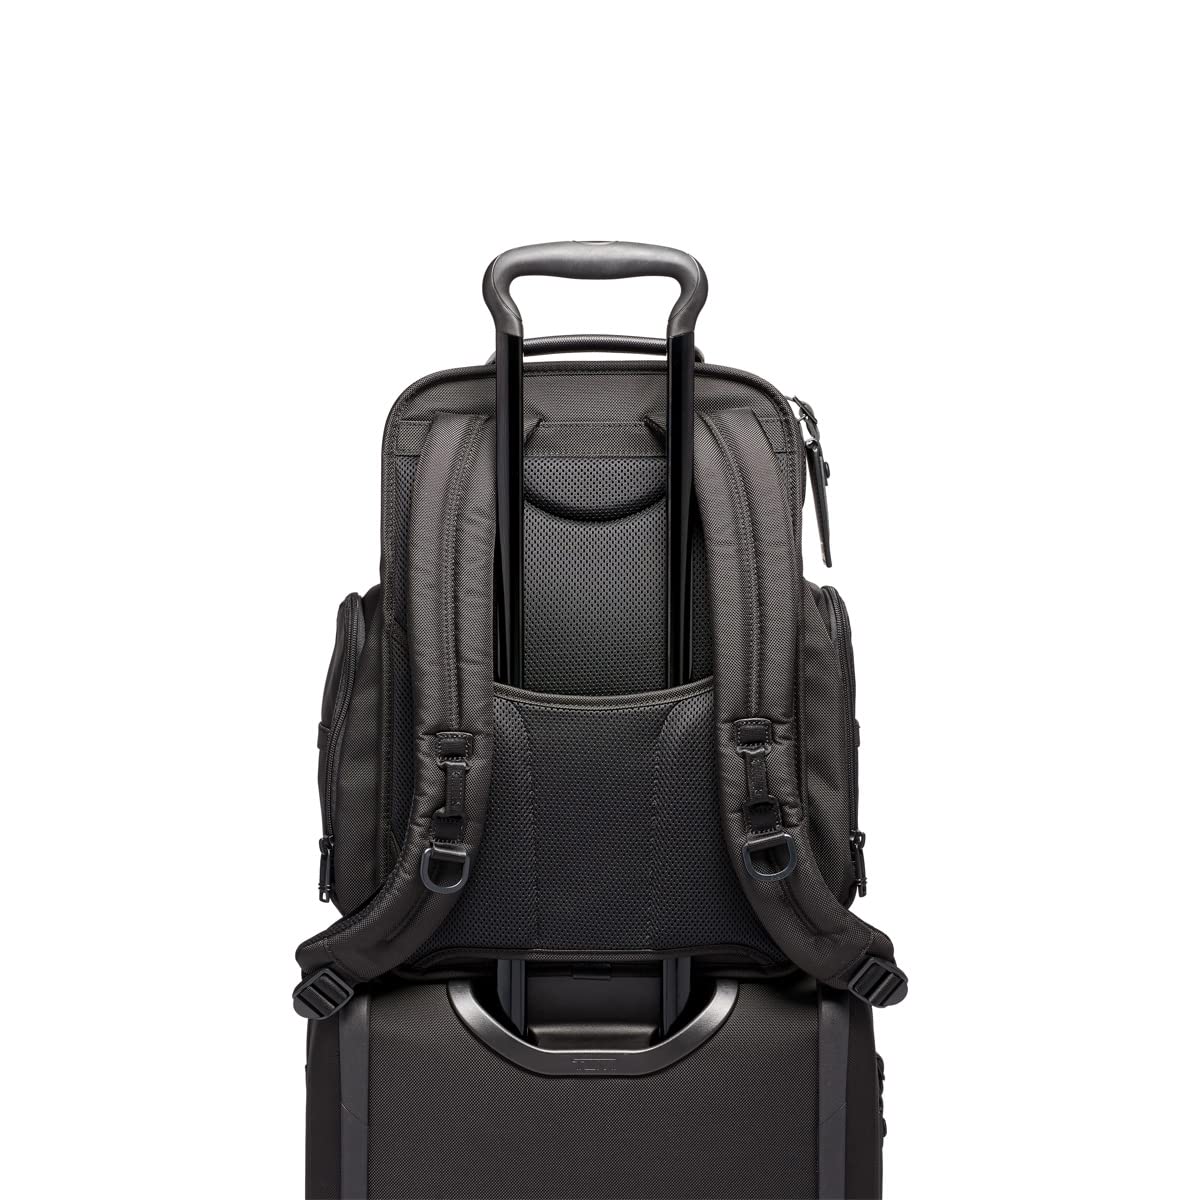 TUMI - Alpha 3 Brief Pack - 15 Inch Computer Backpack (Black) Alpha 3 Electronic Cord Pouch (Black) - Bundle